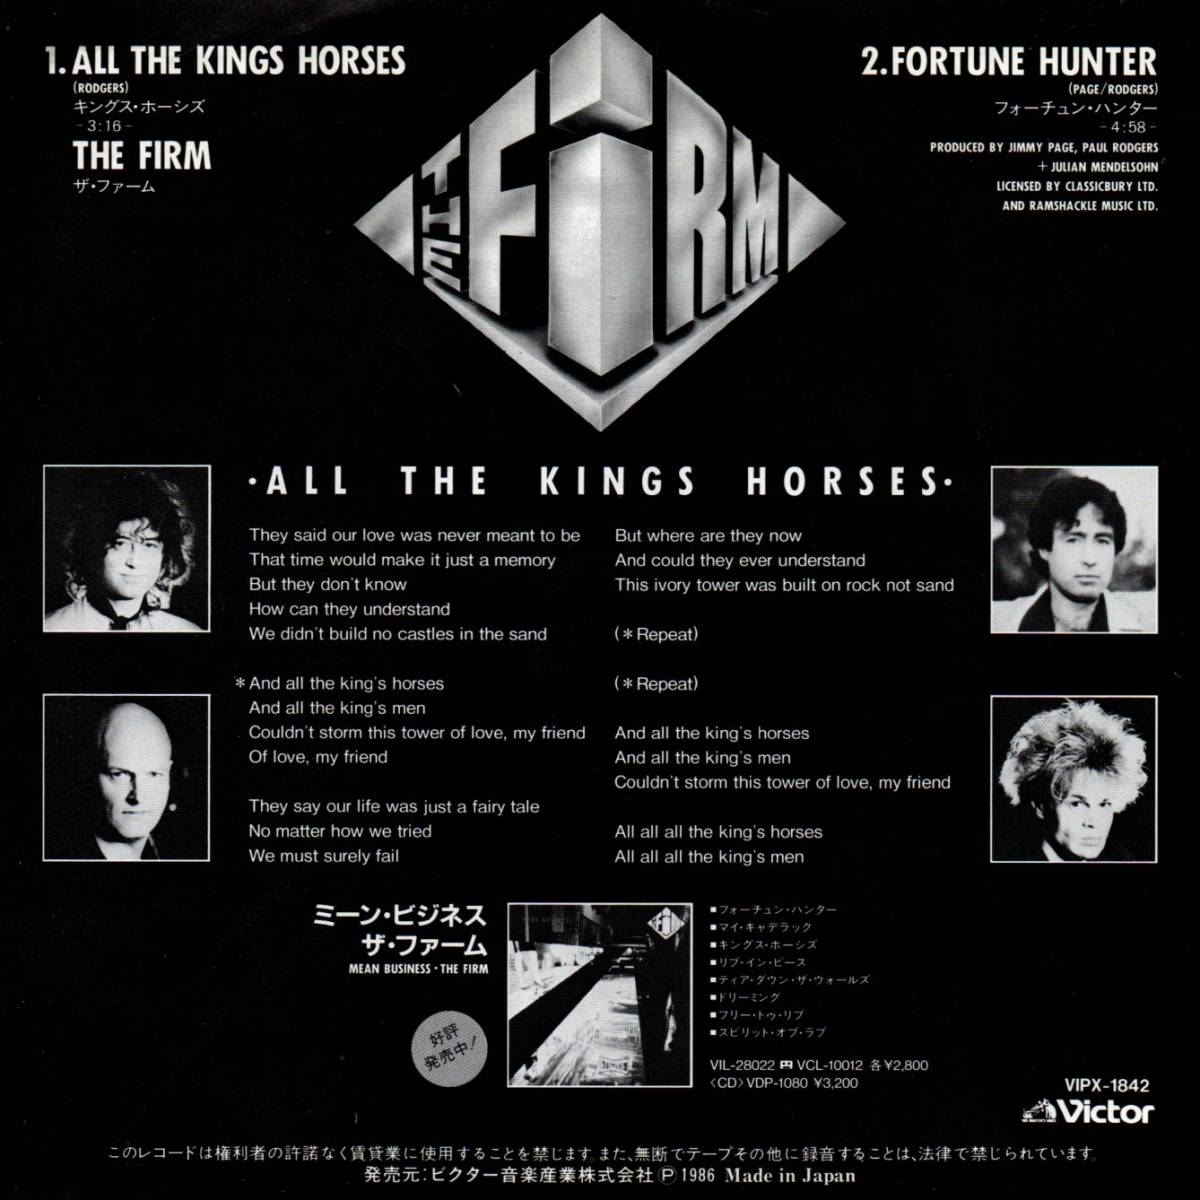 The Firm 「All The Kings Horses/ Fortune Hunter」国内盤サンプルEPレコード　（Paul Rodgers, Jimmy Page関連)_画像2